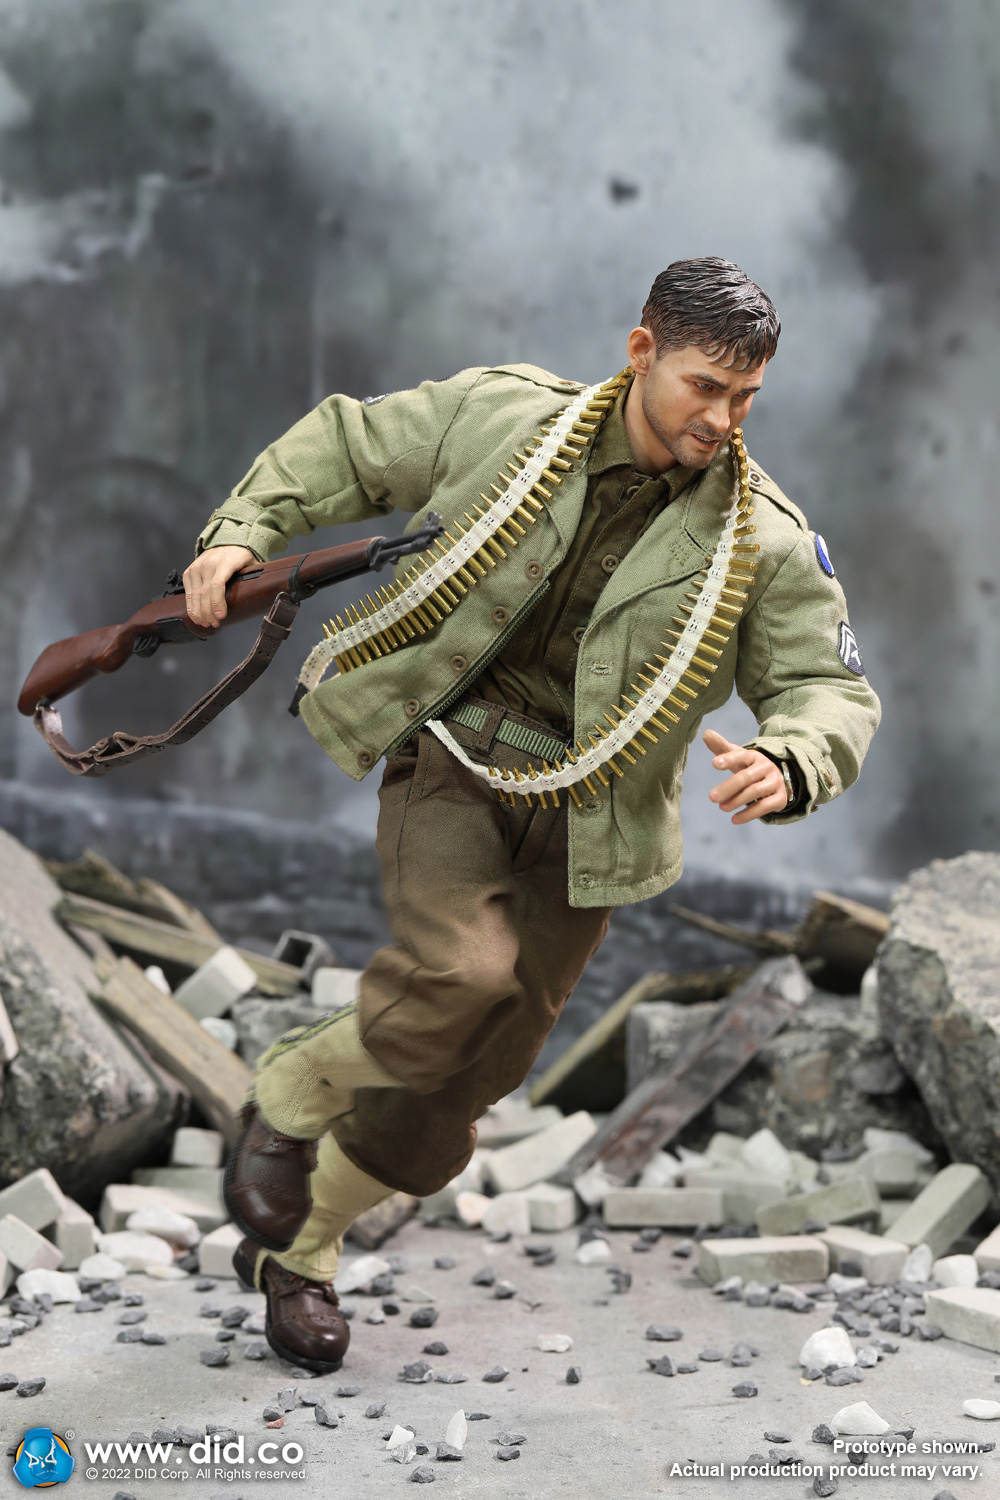 movie-based - NEW PRODUCT: DiD: A80156 WWII US 29th Infantry Technician – Corporal Upham   7608